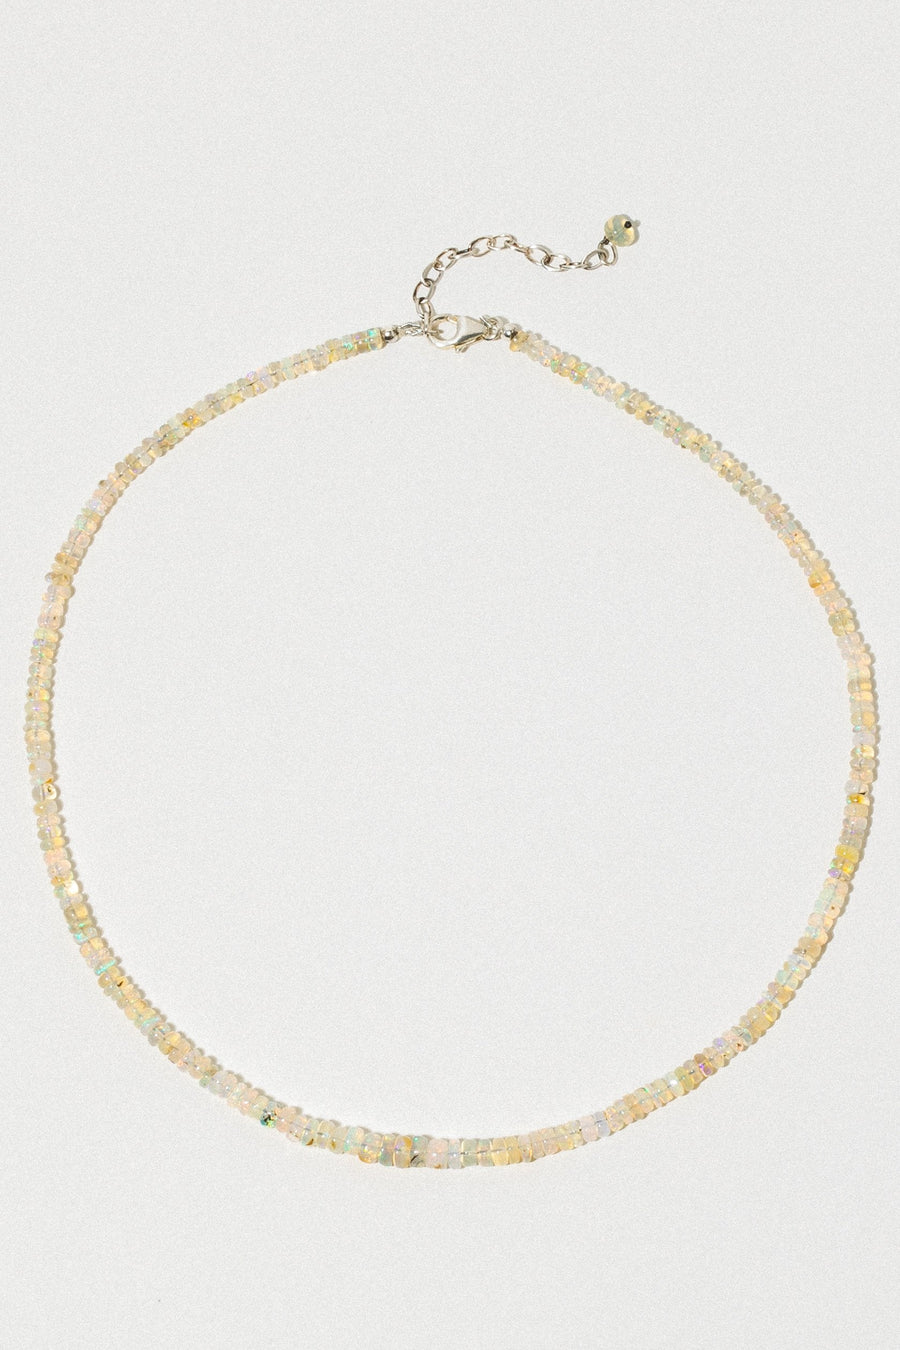 Starborn Creations Jewerly Silver / 16 inches Prism Opal Necklace